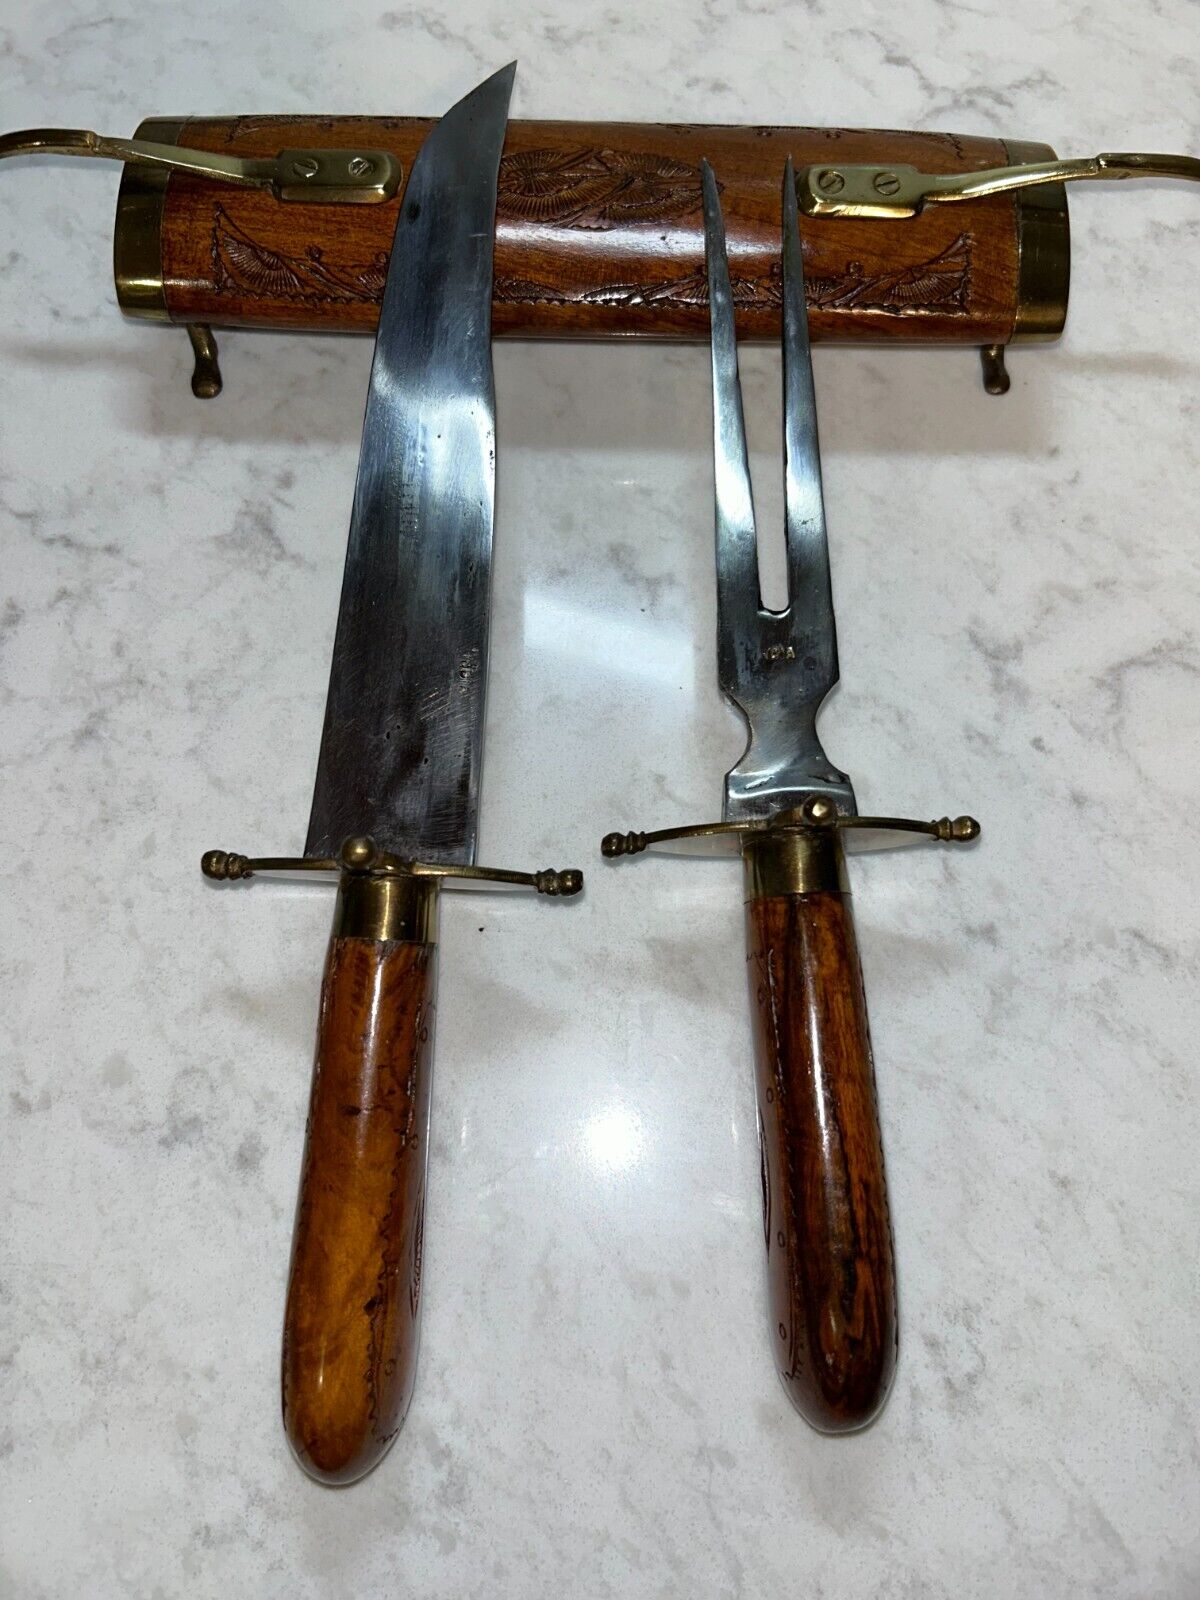 Vintage Indian Carving Set - With Wood and Brass Locking Sheath Fork & Knife